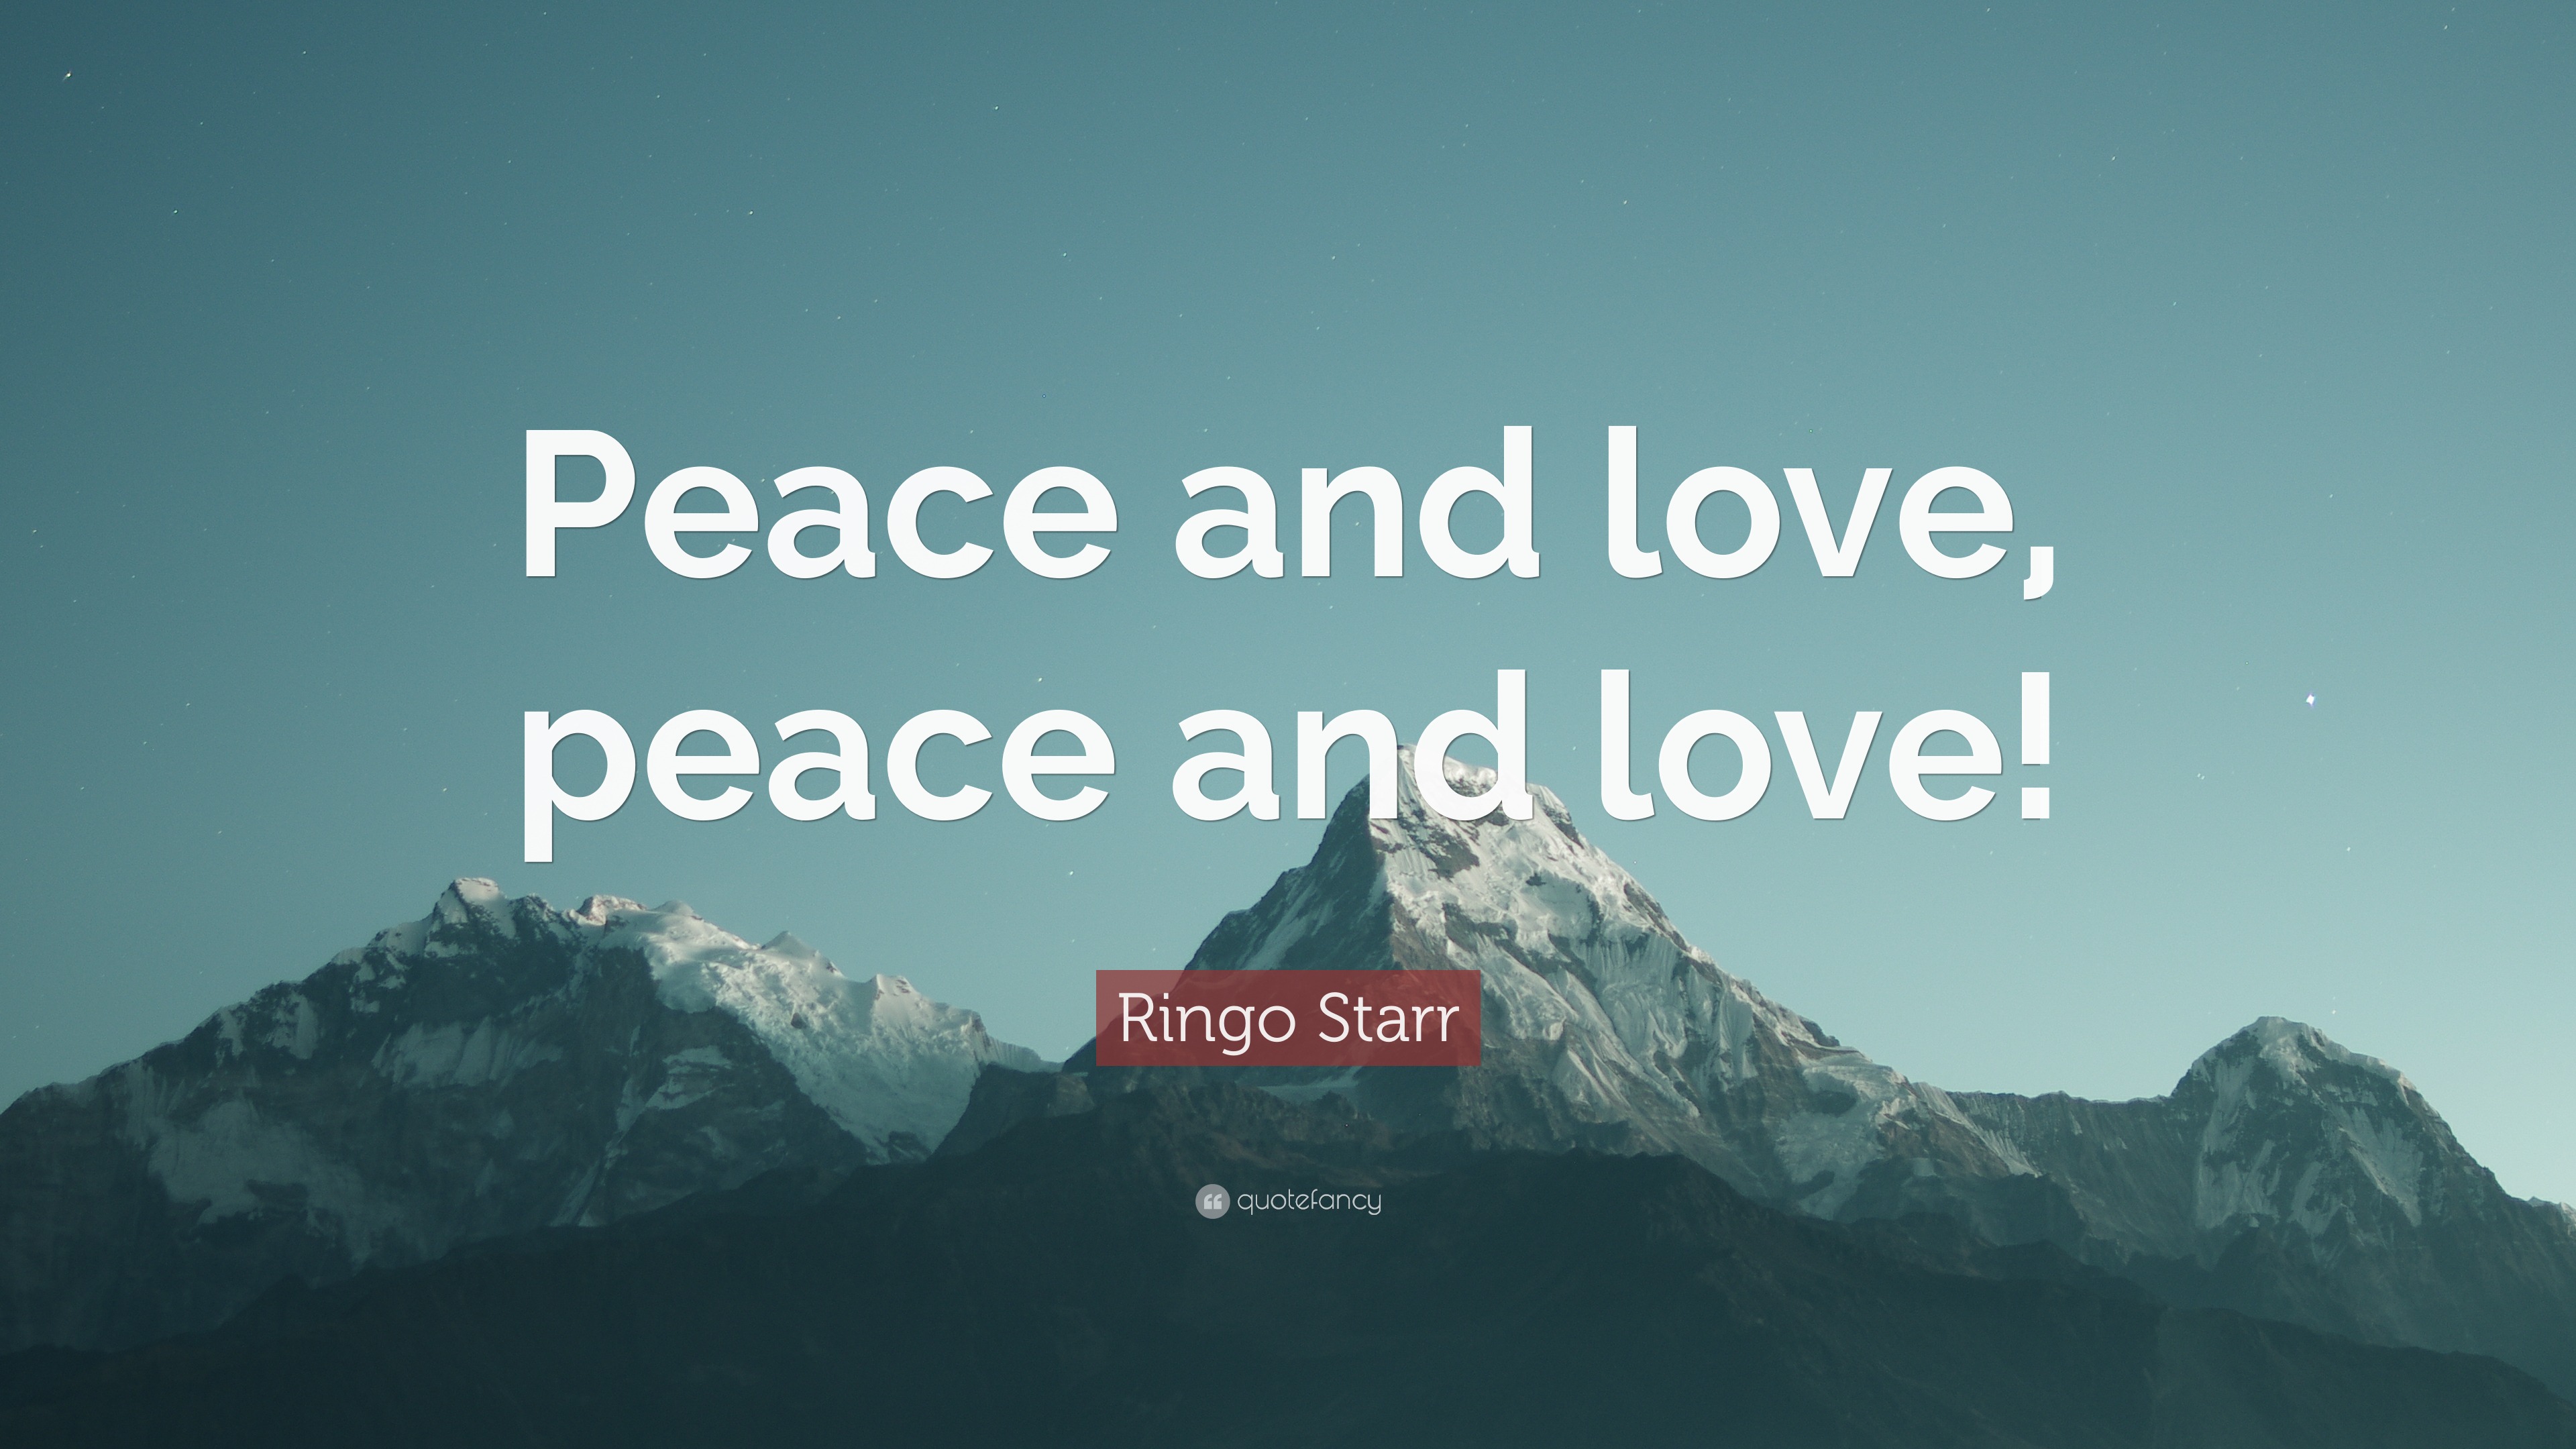 Ringo Starr Quote: “Peace and love, peace and love!”